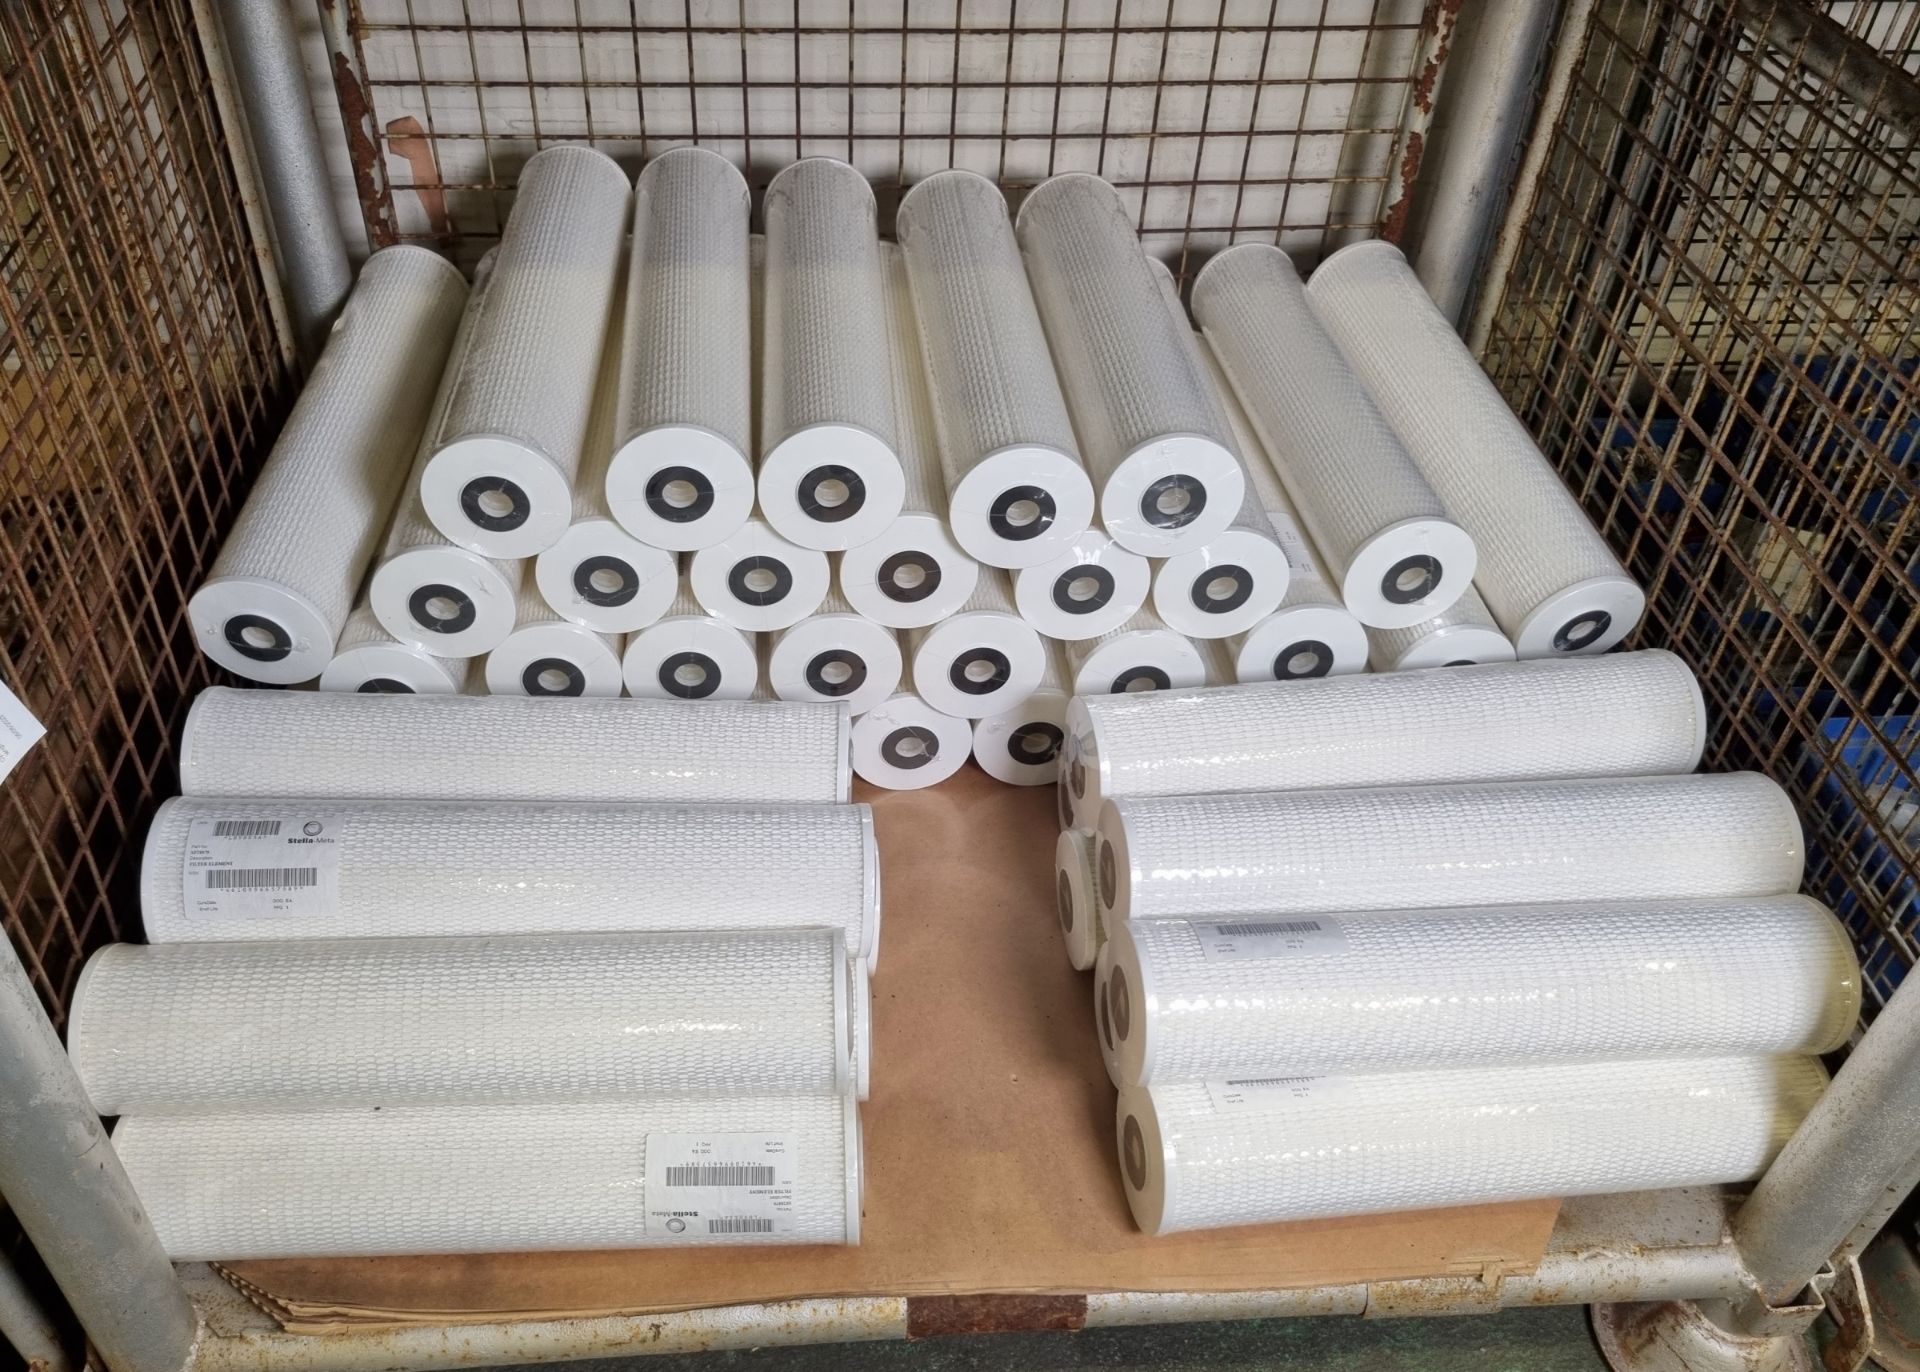 45x Cylinder paper filter cartridges - length: 500mm, OD: 115mm, ID: 28mm - Image 2 of 5